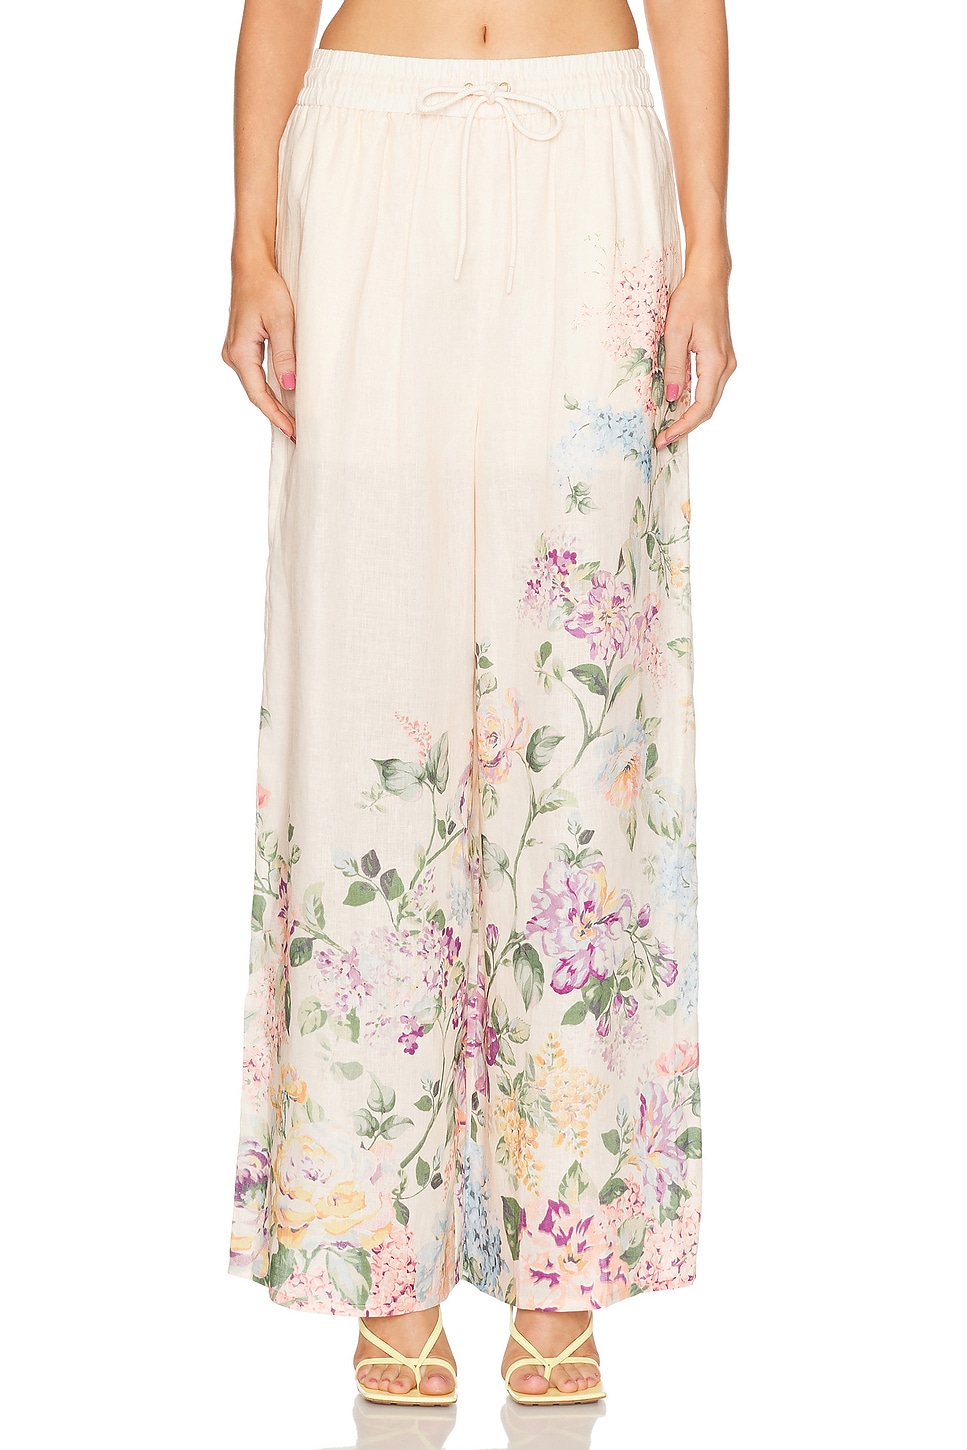 Image 1 of Zimmermann Halliday Relaxed Pant in Cream Watercolour Floral